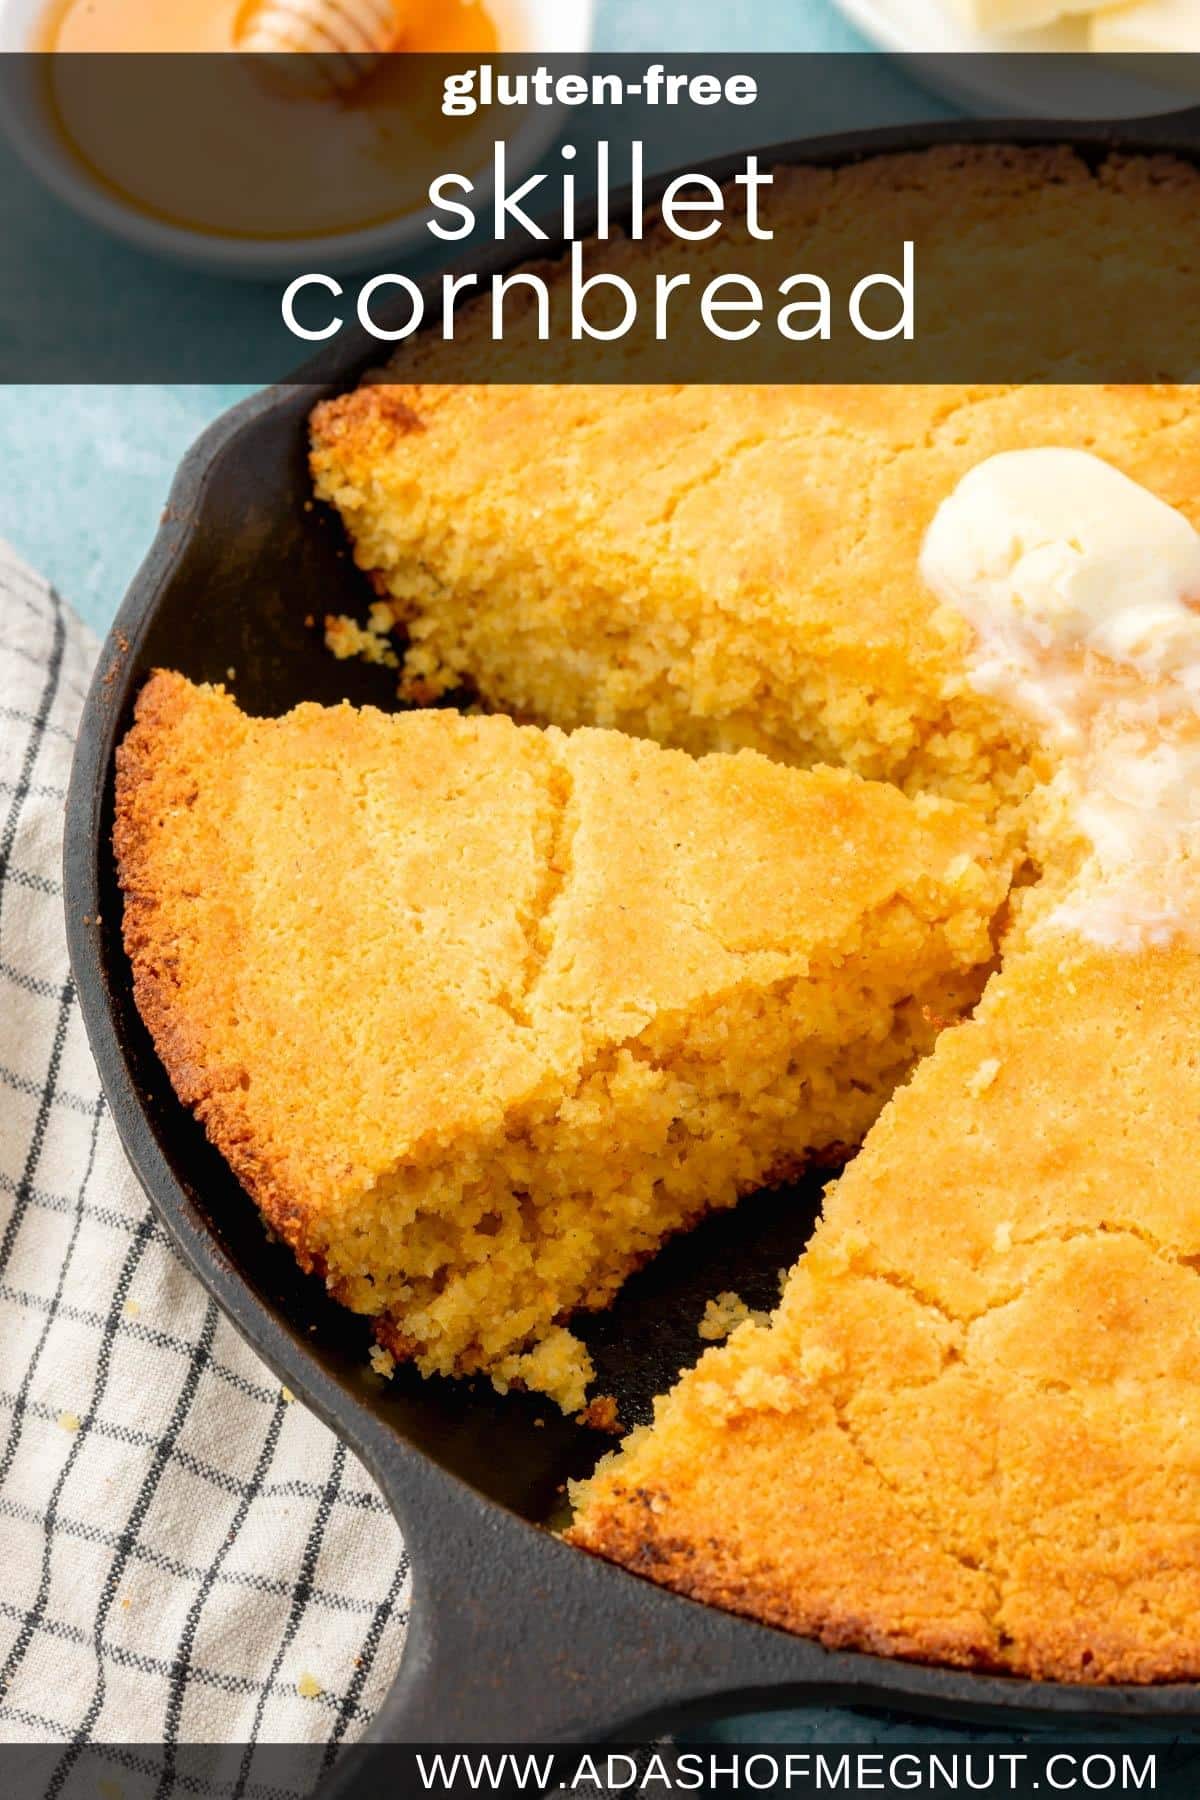 A slice of cornbread in a cast iron skillet that has been cut from the remaining whole cornbread.